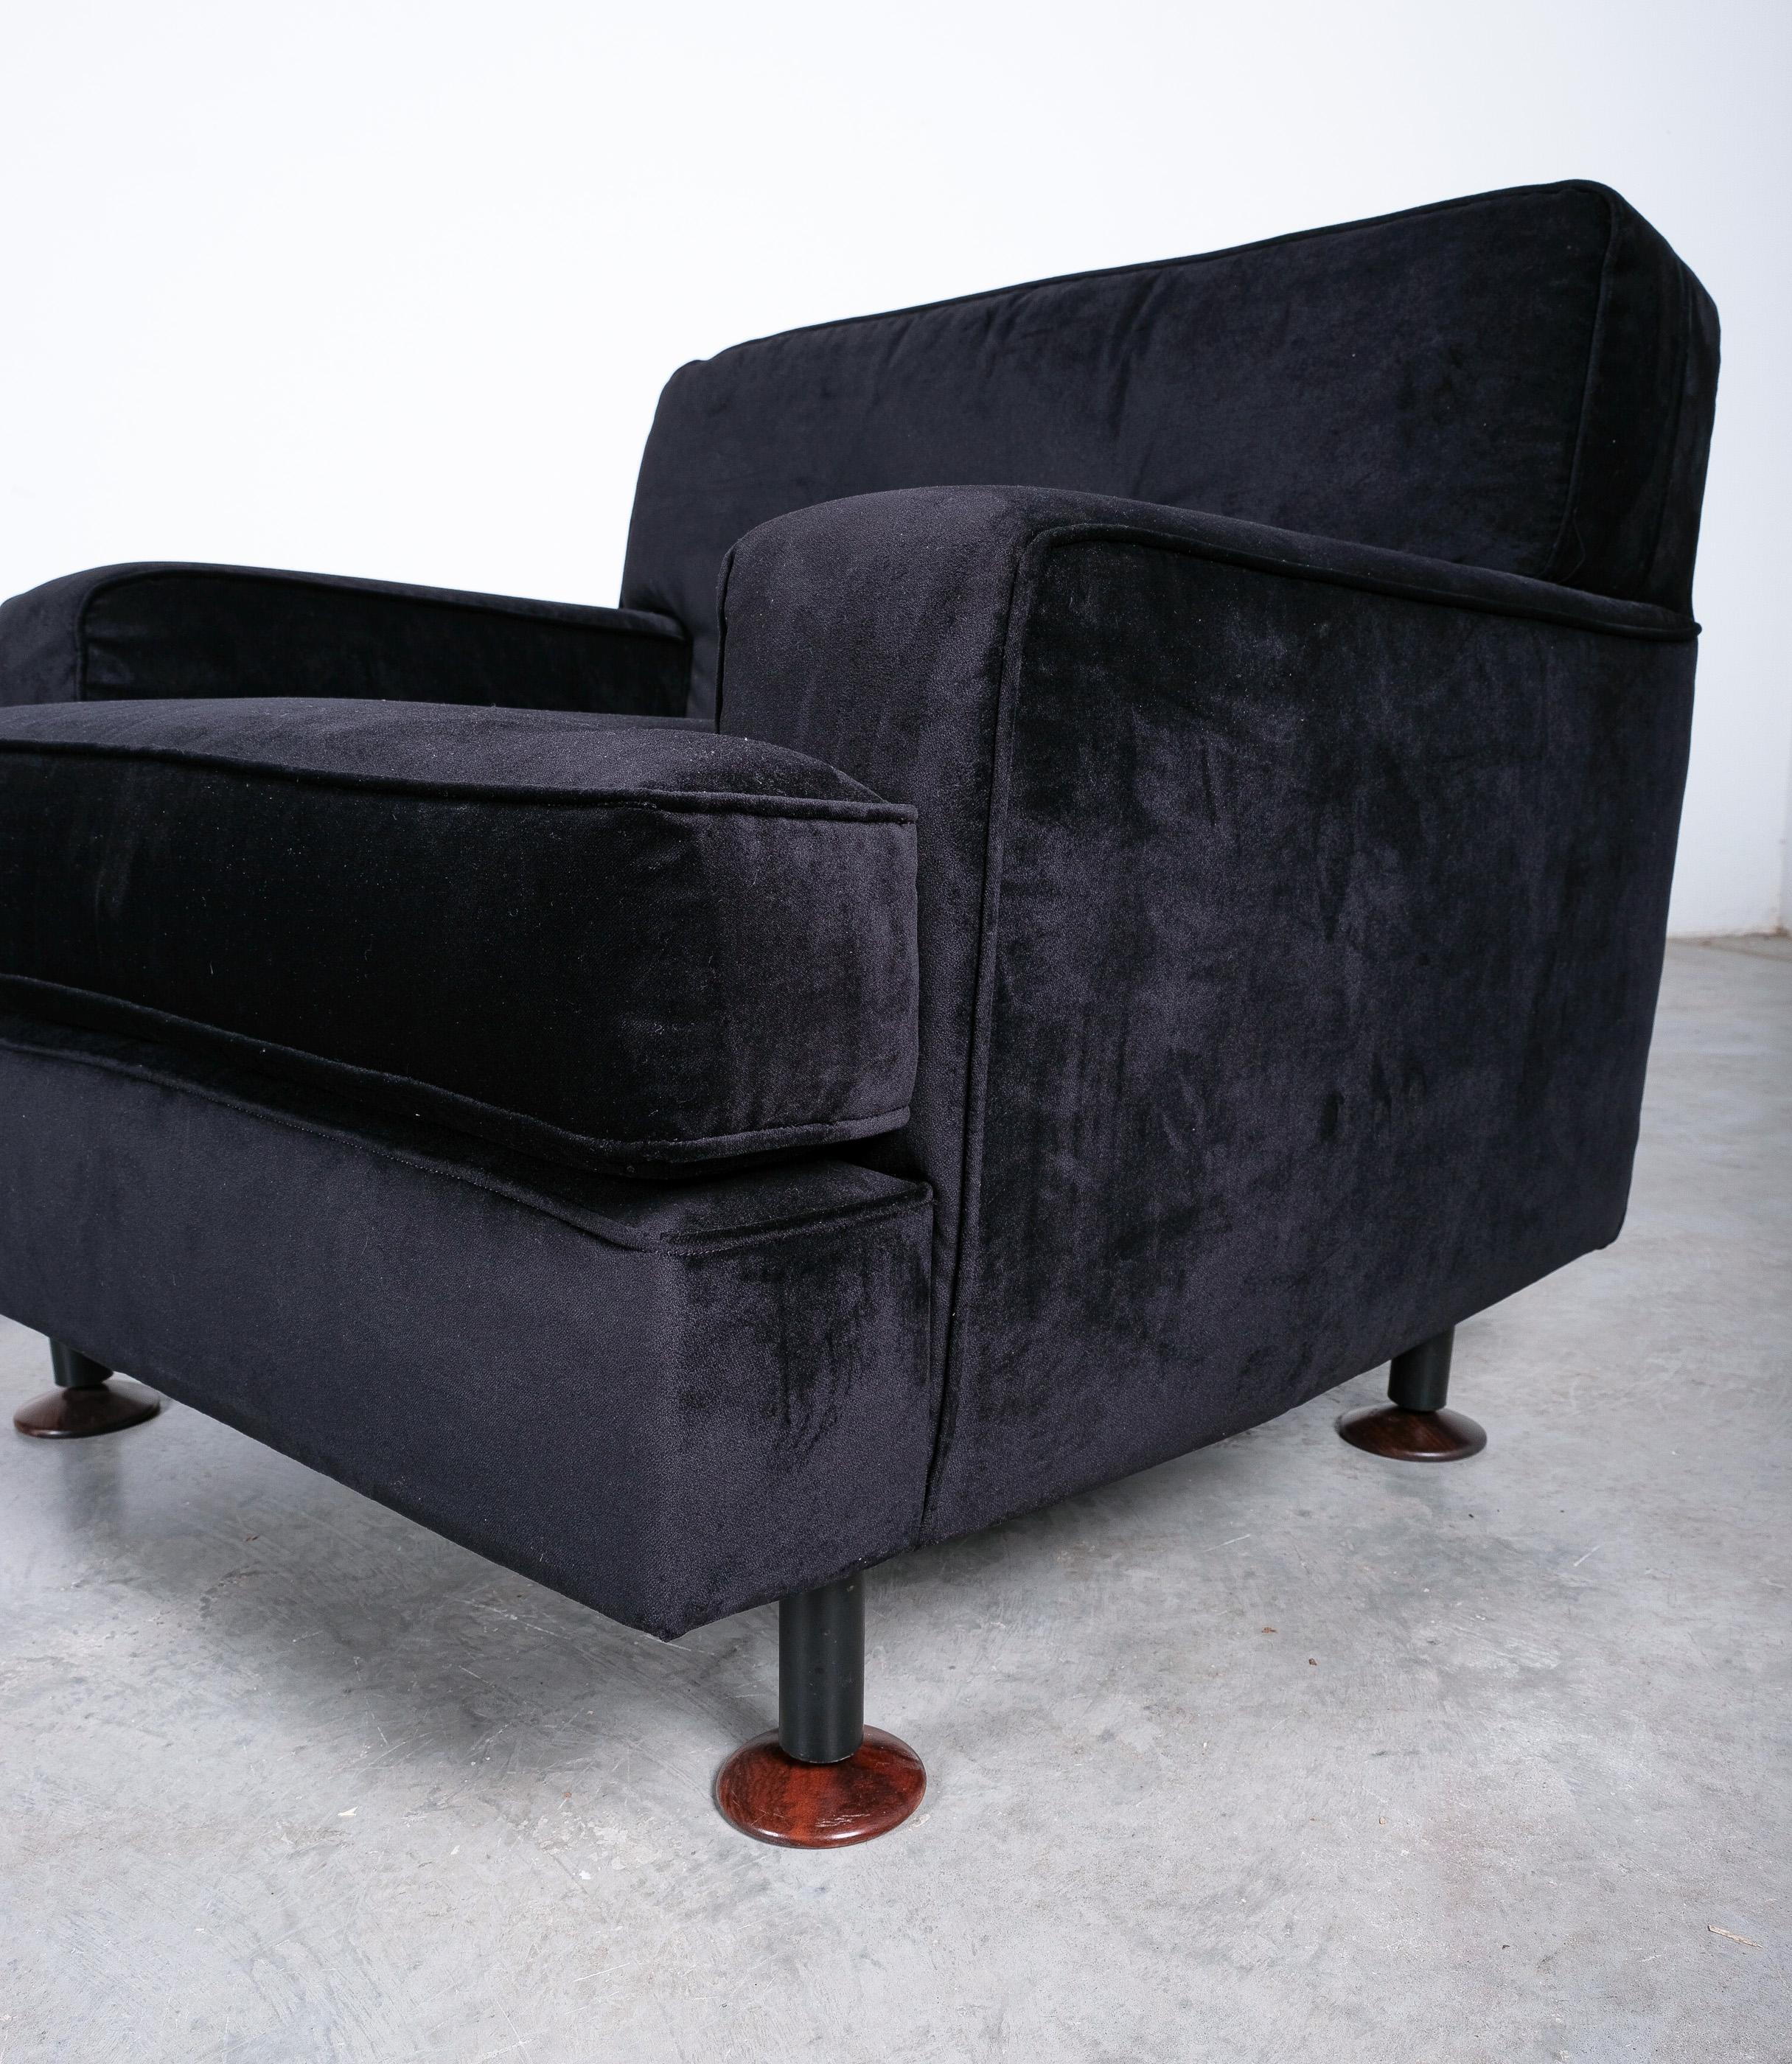 Mid-20th Century Marco Zanuso 'Square' Black Velvet Chairs with Teak Feet, Italy, circa 1955 For Sale